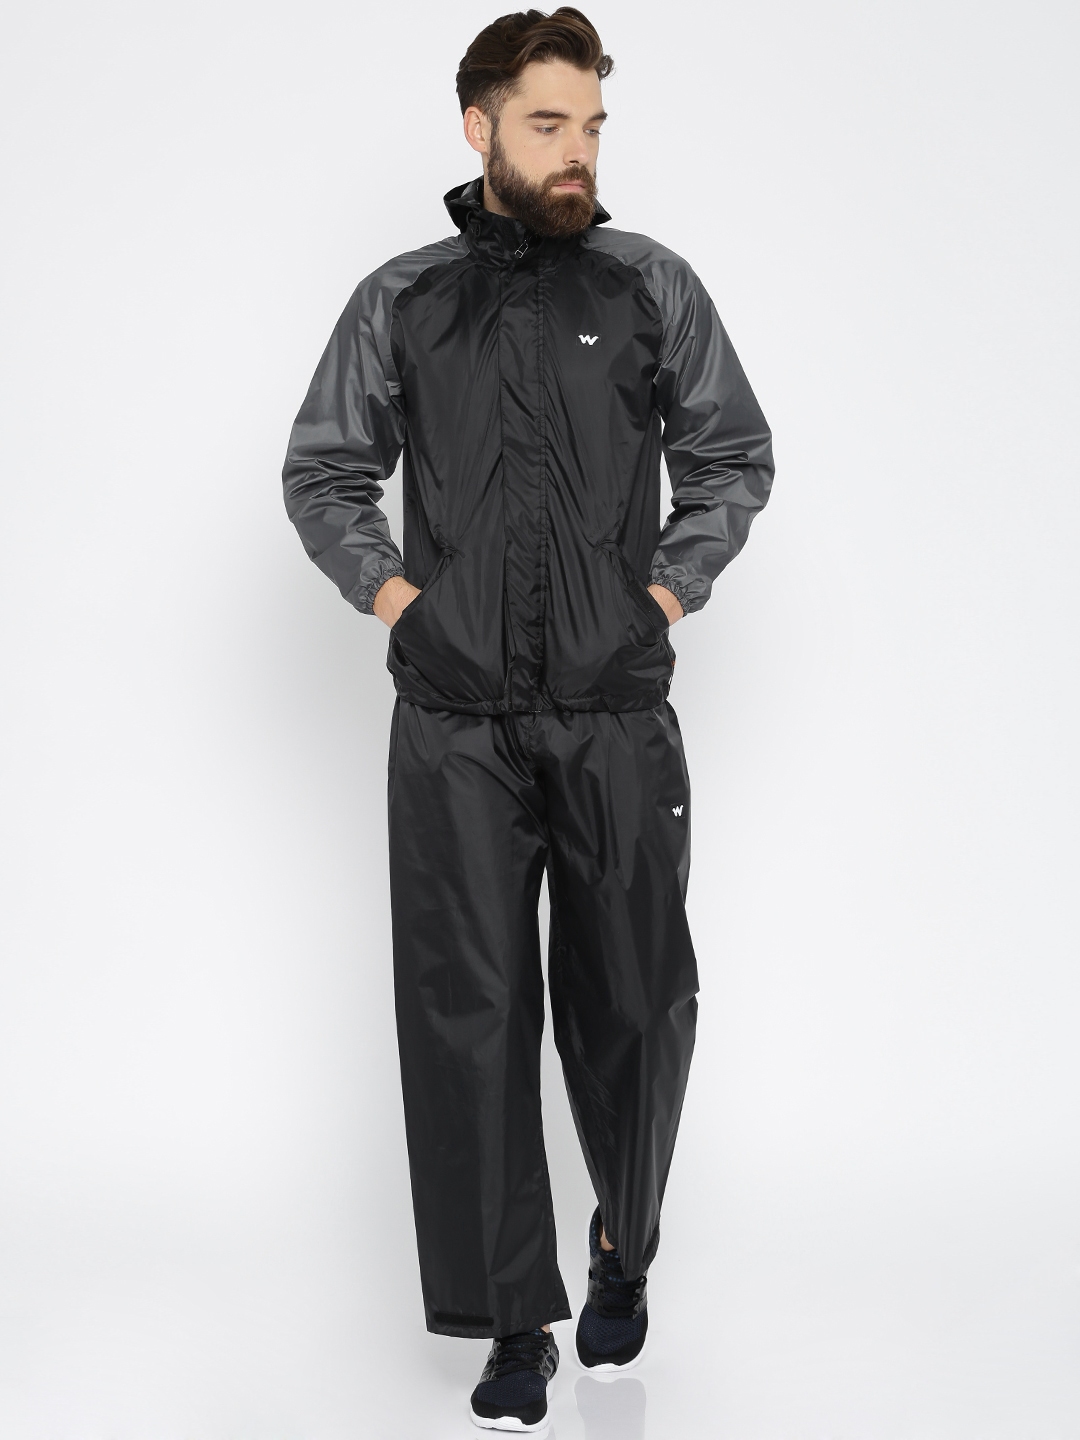 Aggregate more than 91 rain jacket with trousers best - in.cdgdbentre